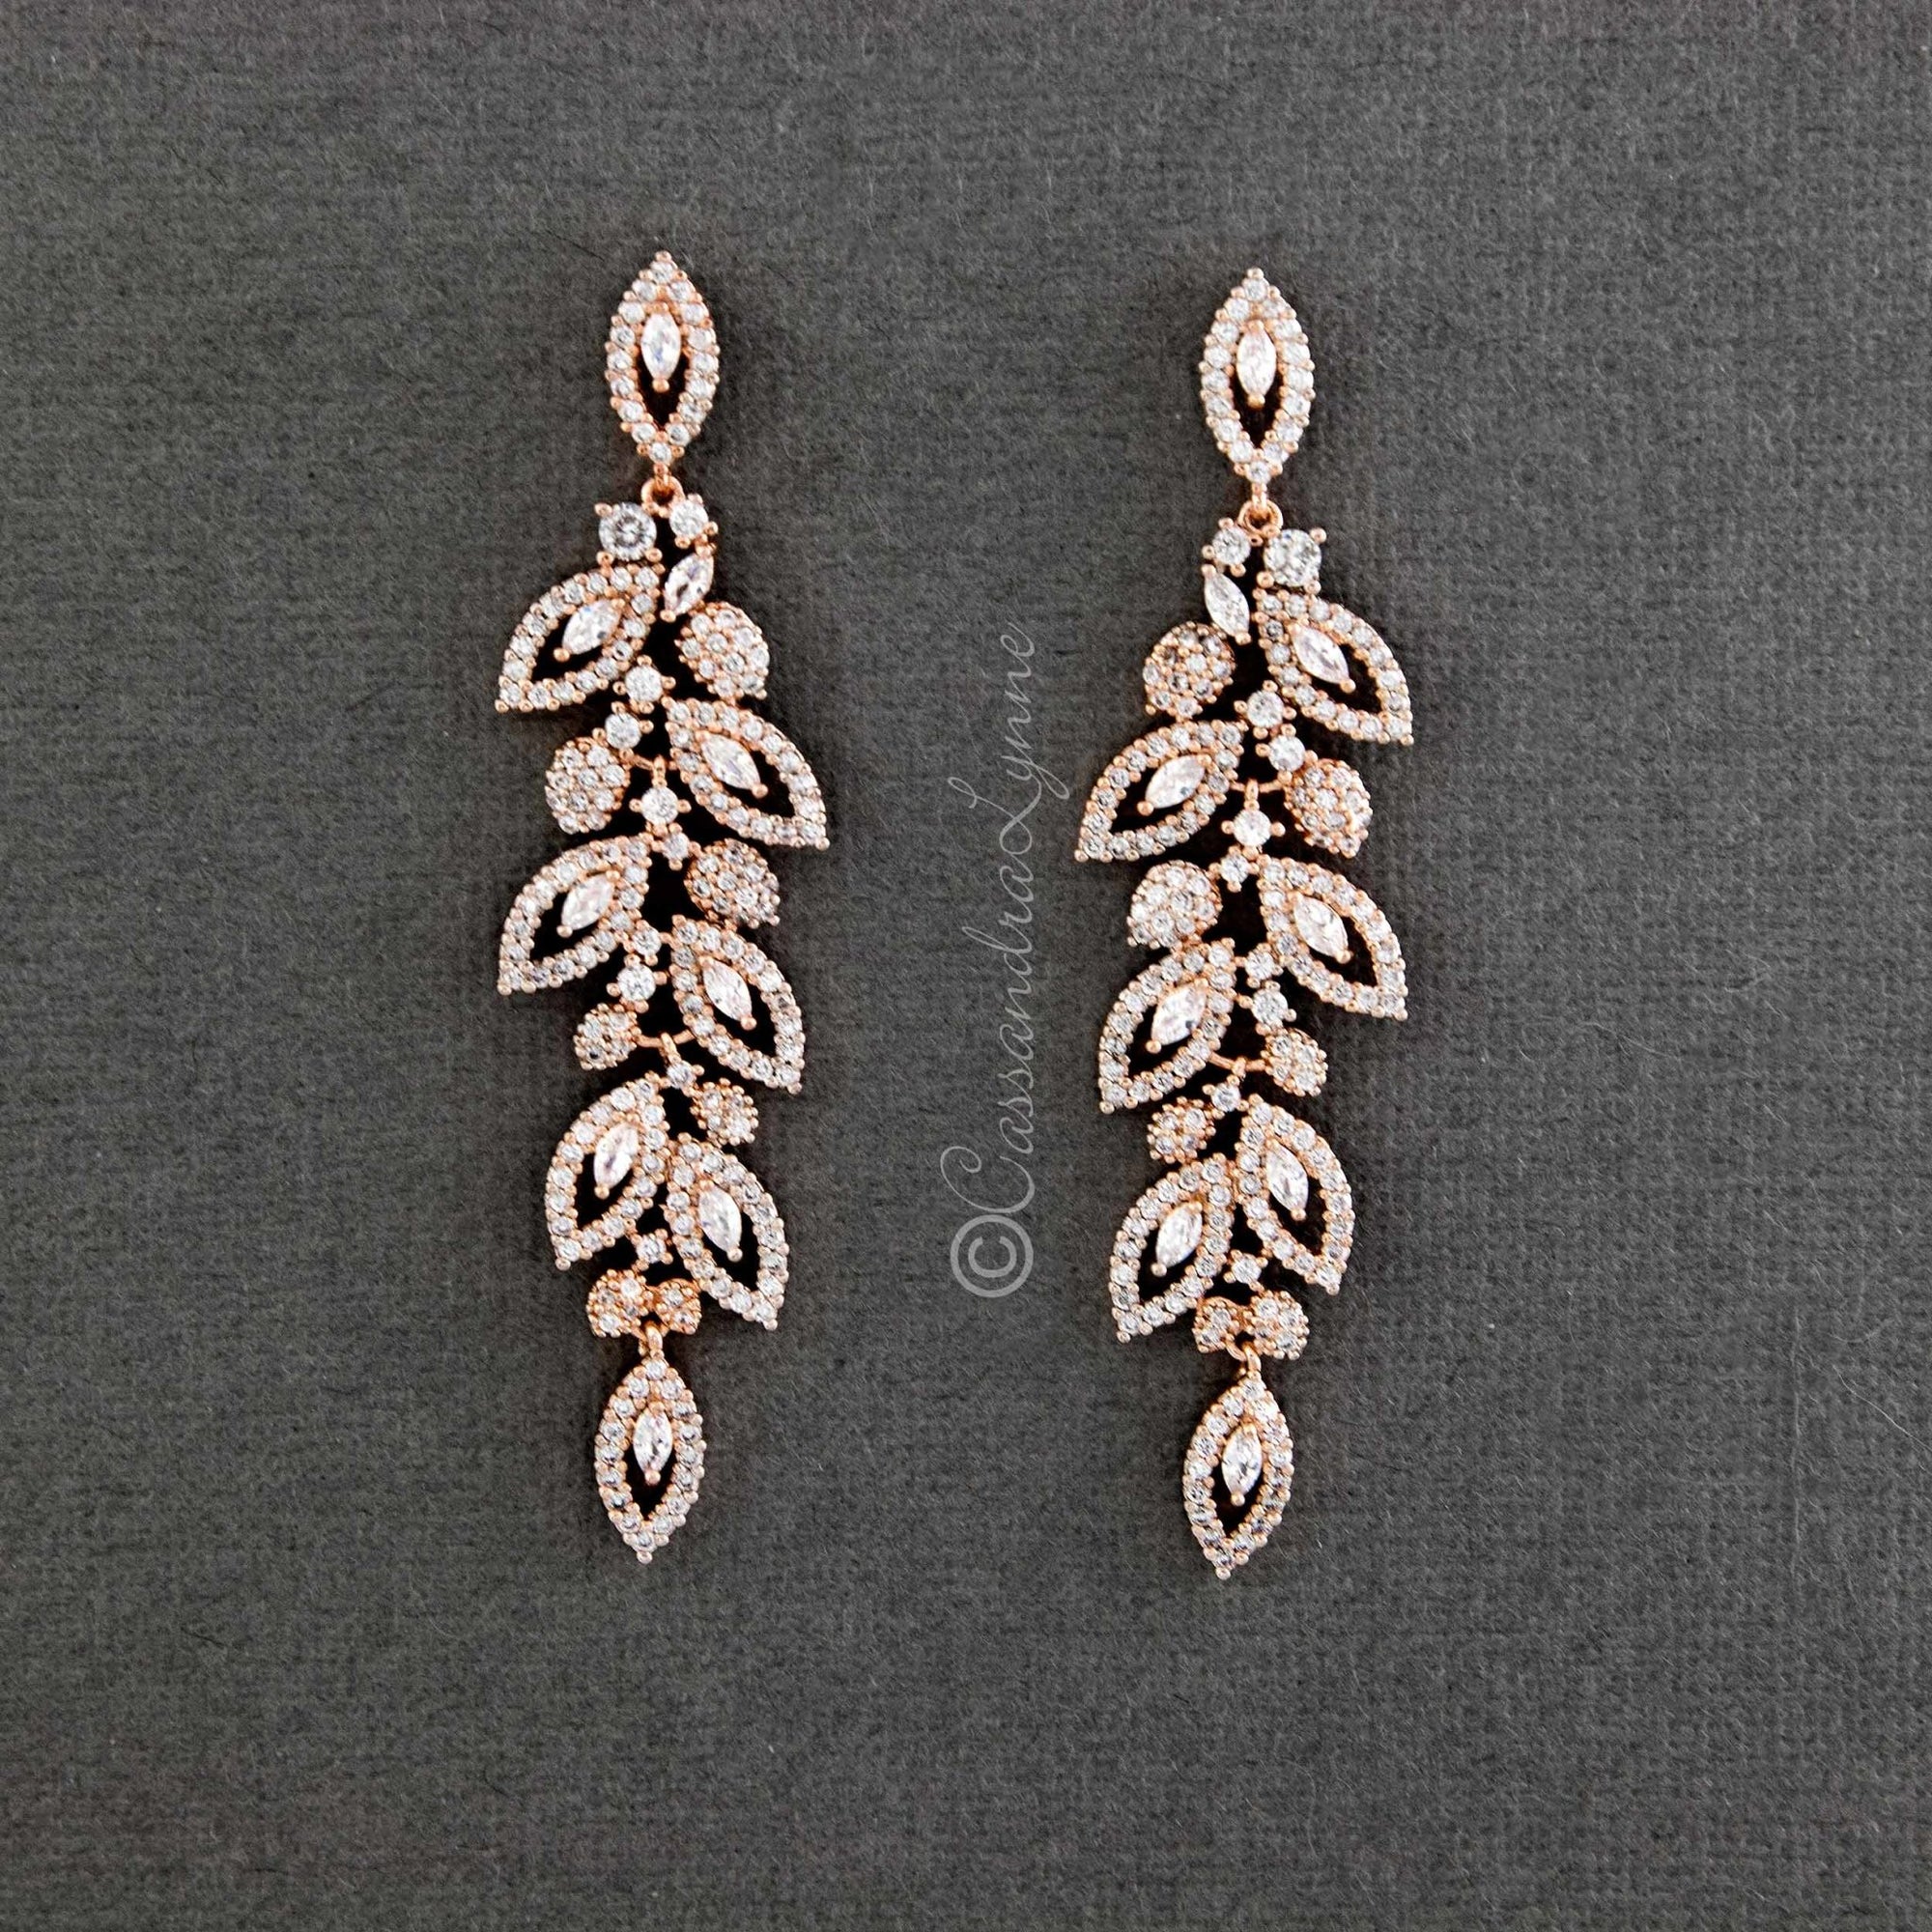 Buy 5pc Chandelier Earrings Charms Silver, Filigree Chandelier, Filigree  Charms, Multi Strand, Dangles, Chandelier Charms, Earring Components Online  in India - Etsy